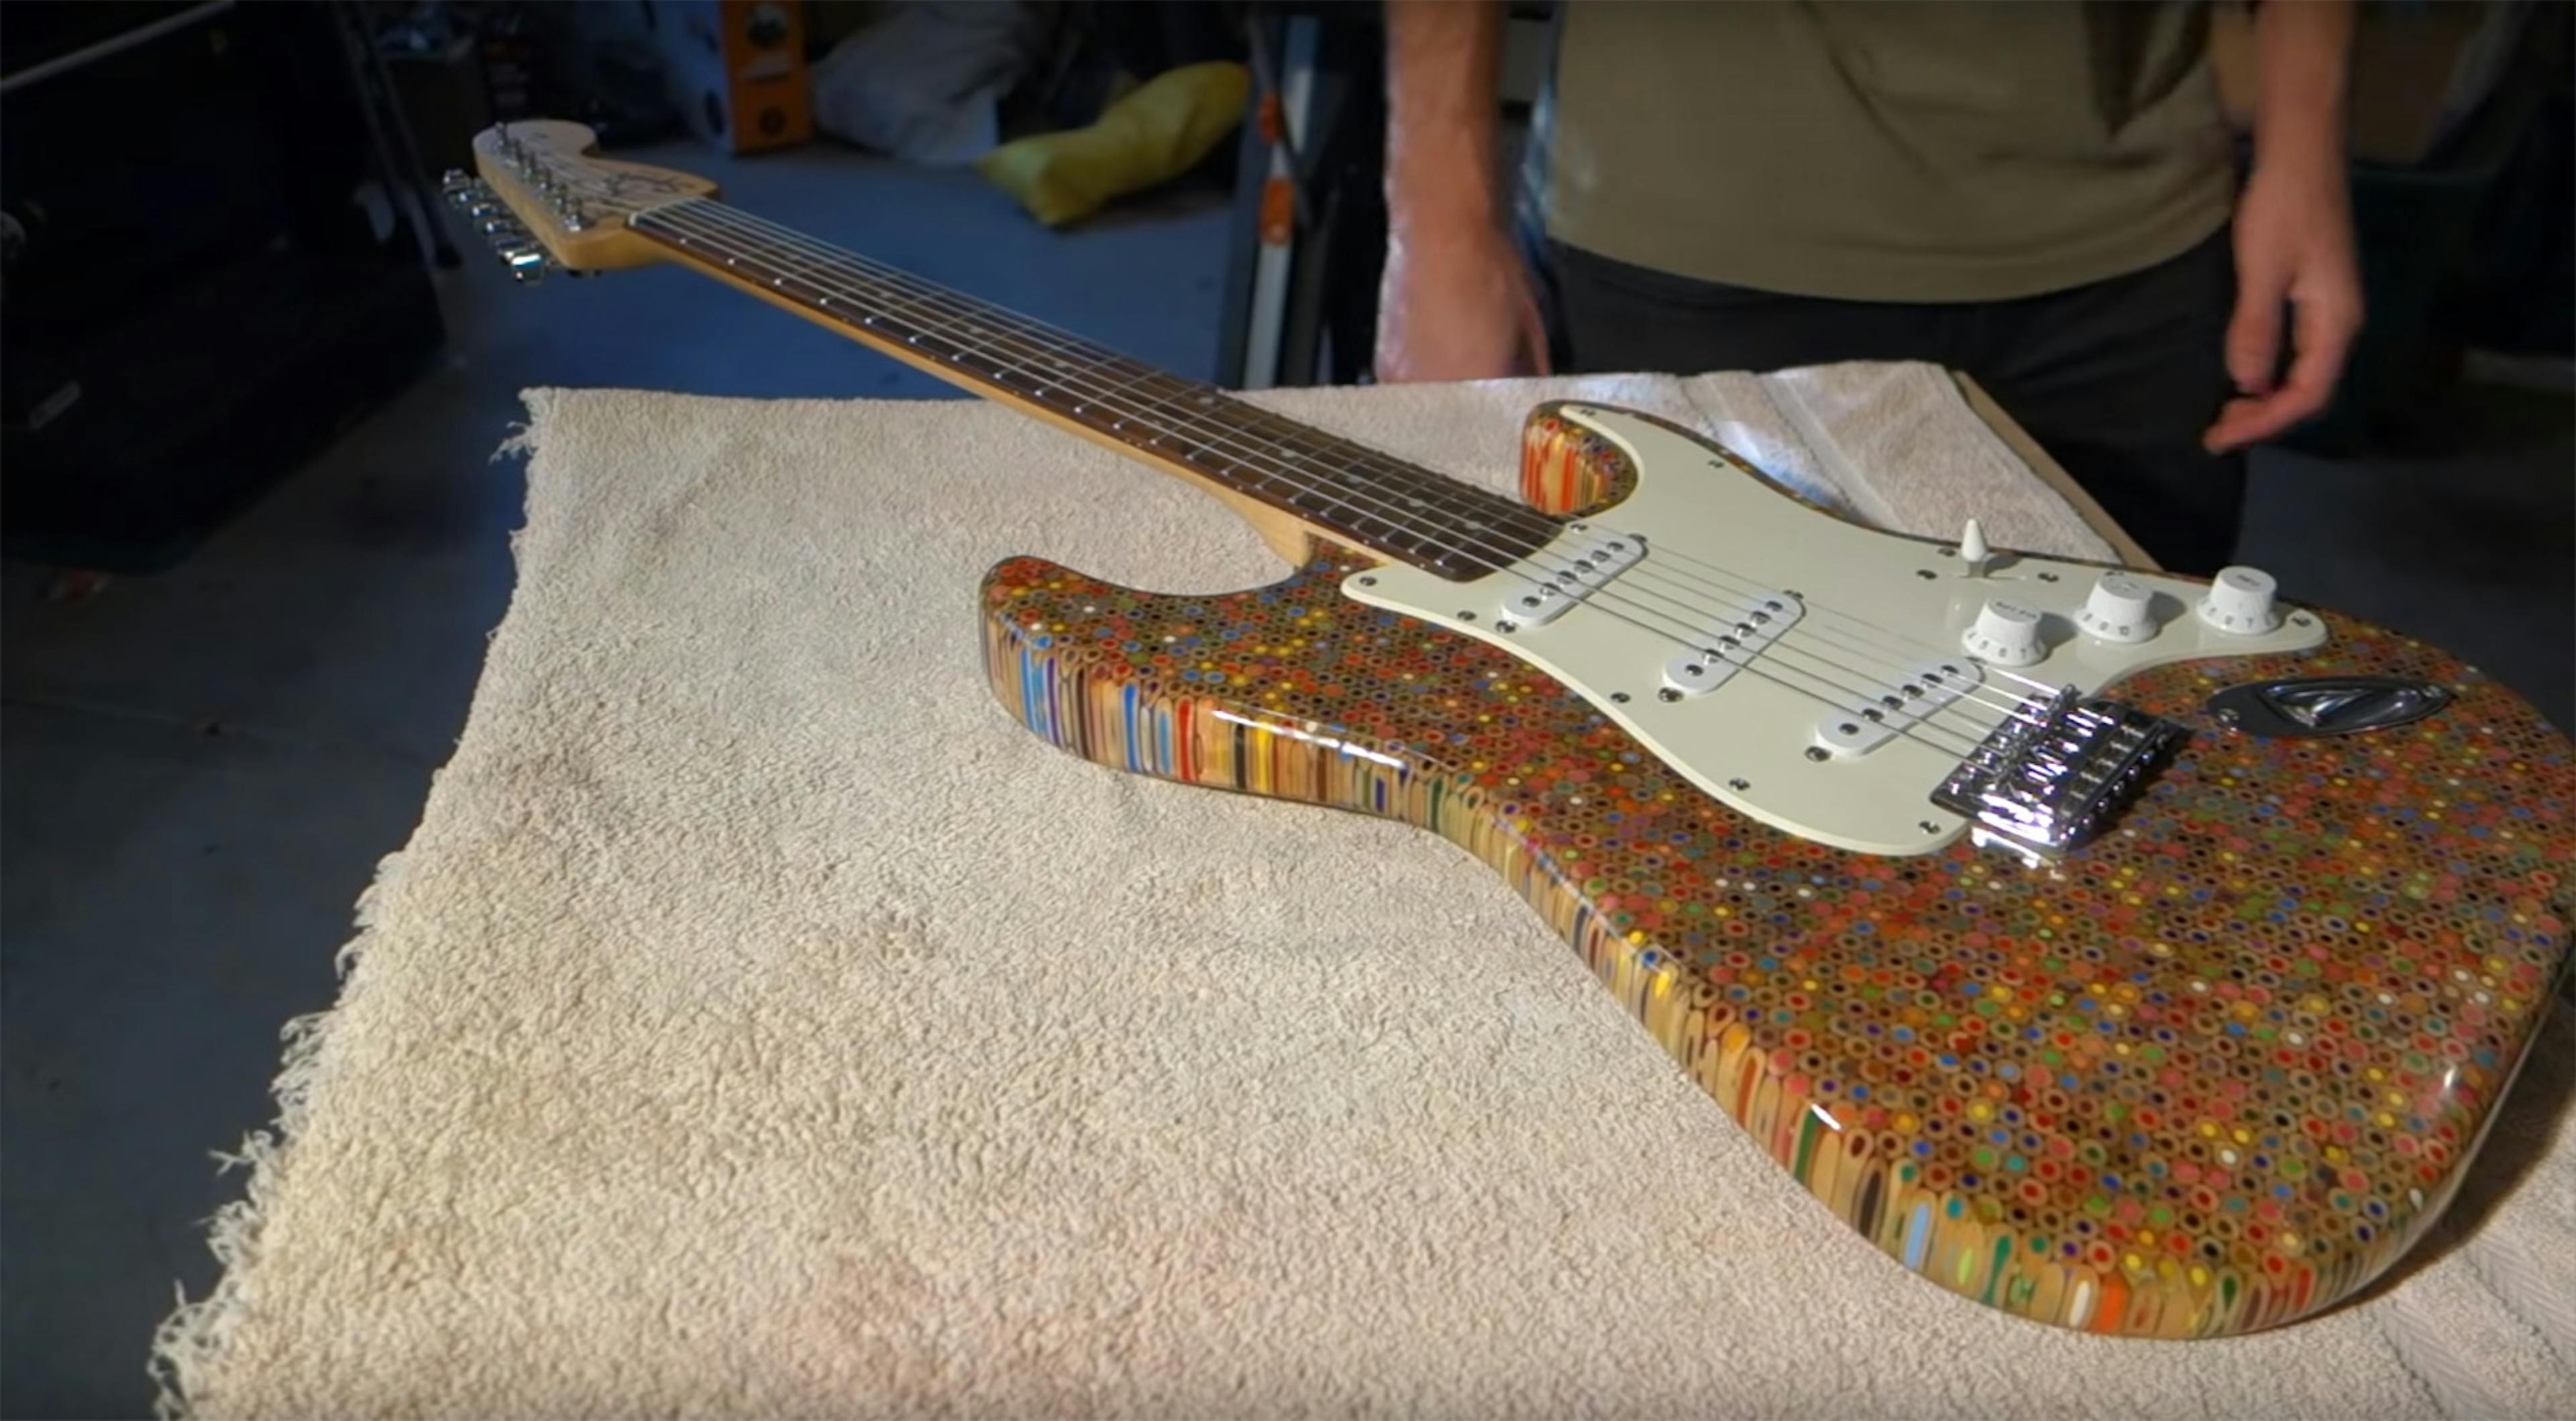 This Guy Made A Guitar Out Of 1,200 Pencils